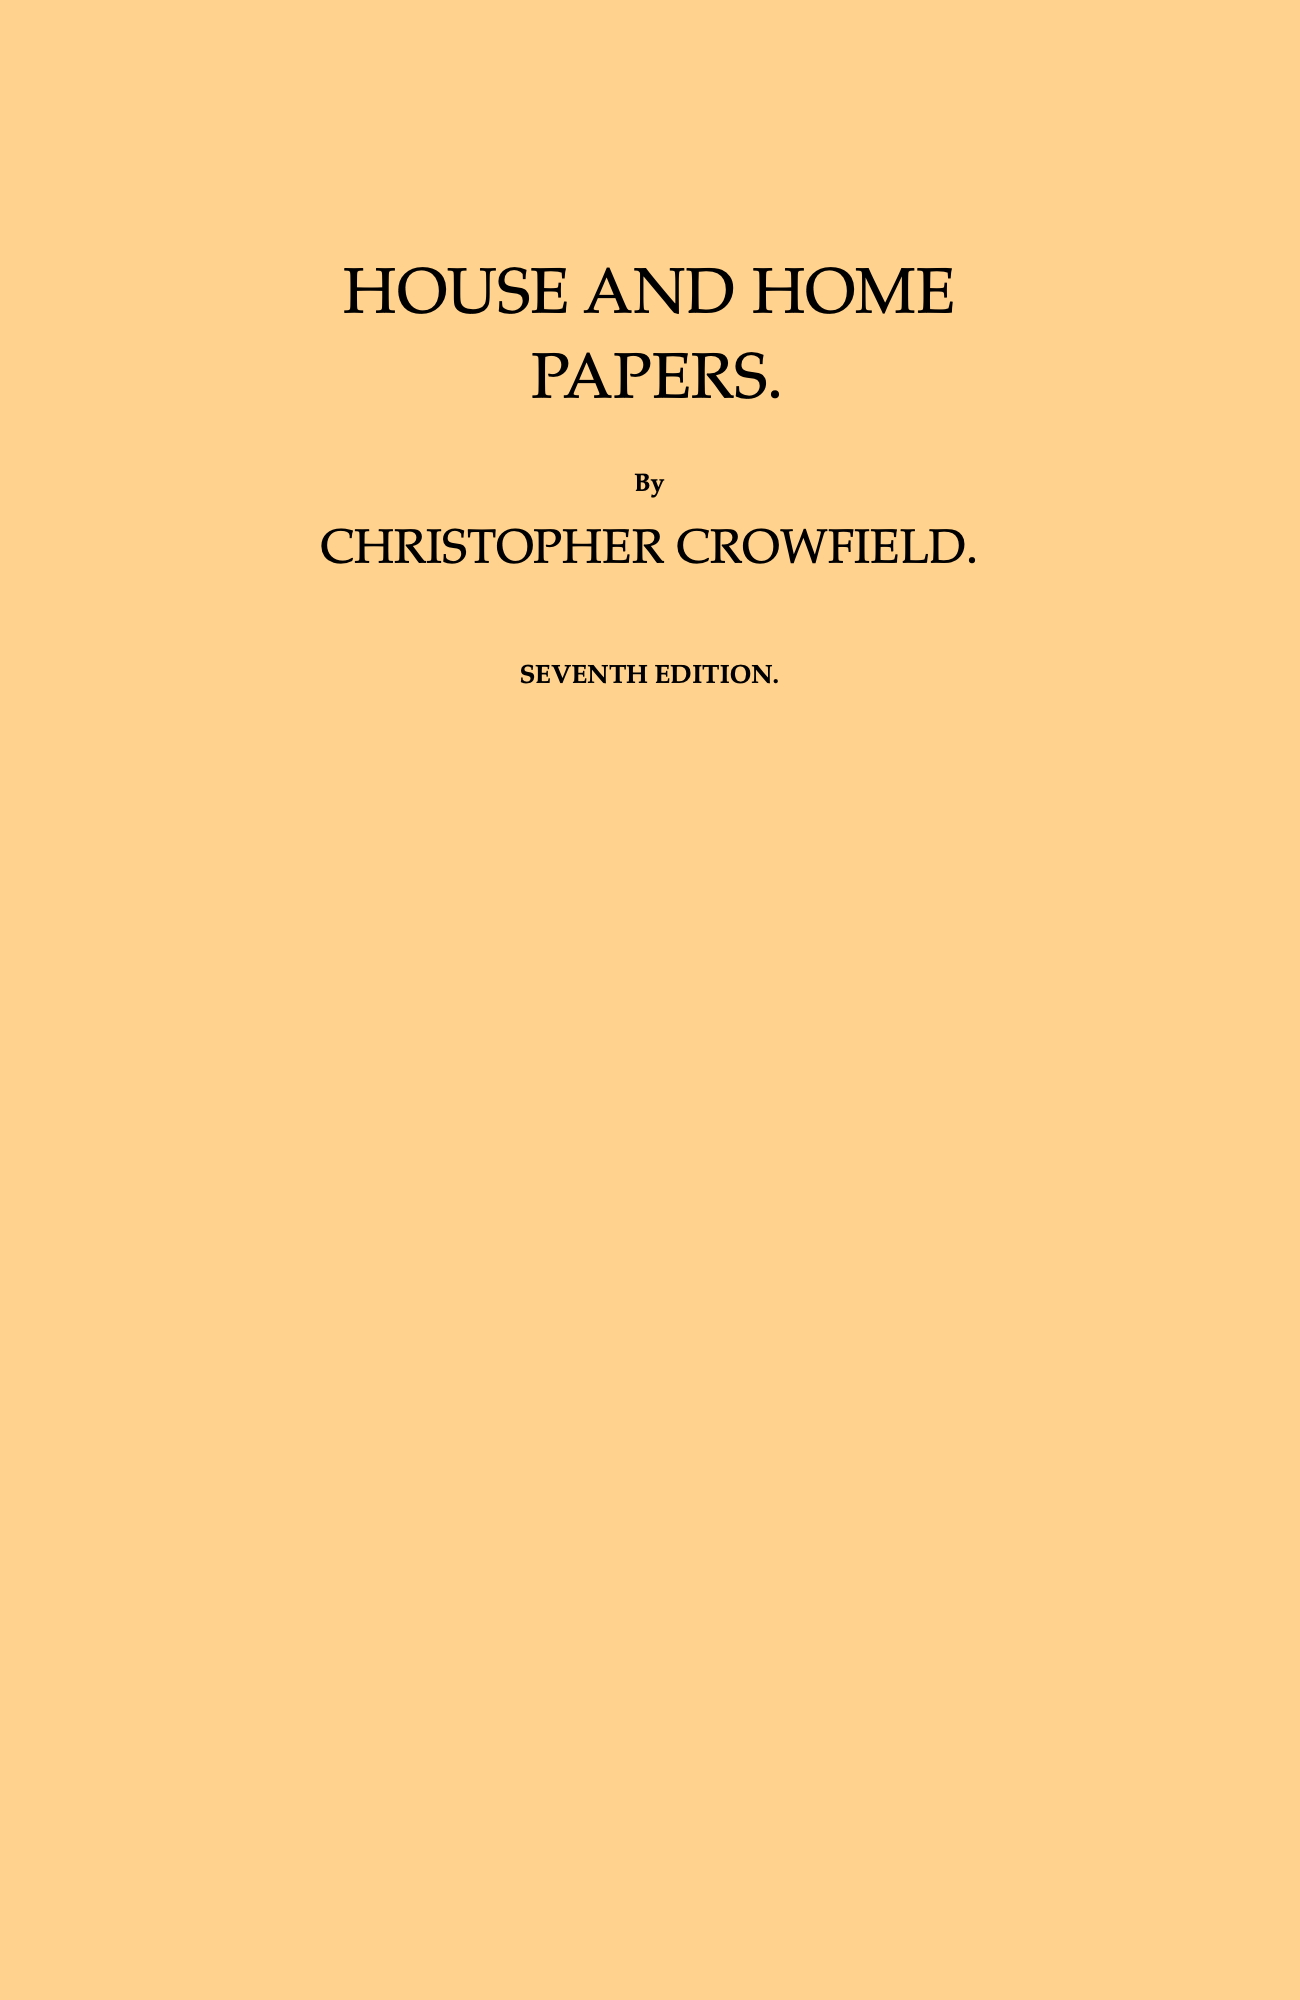 House and Home Papers, by Christopher Crowfield--A Project Gutenberg eBook photo